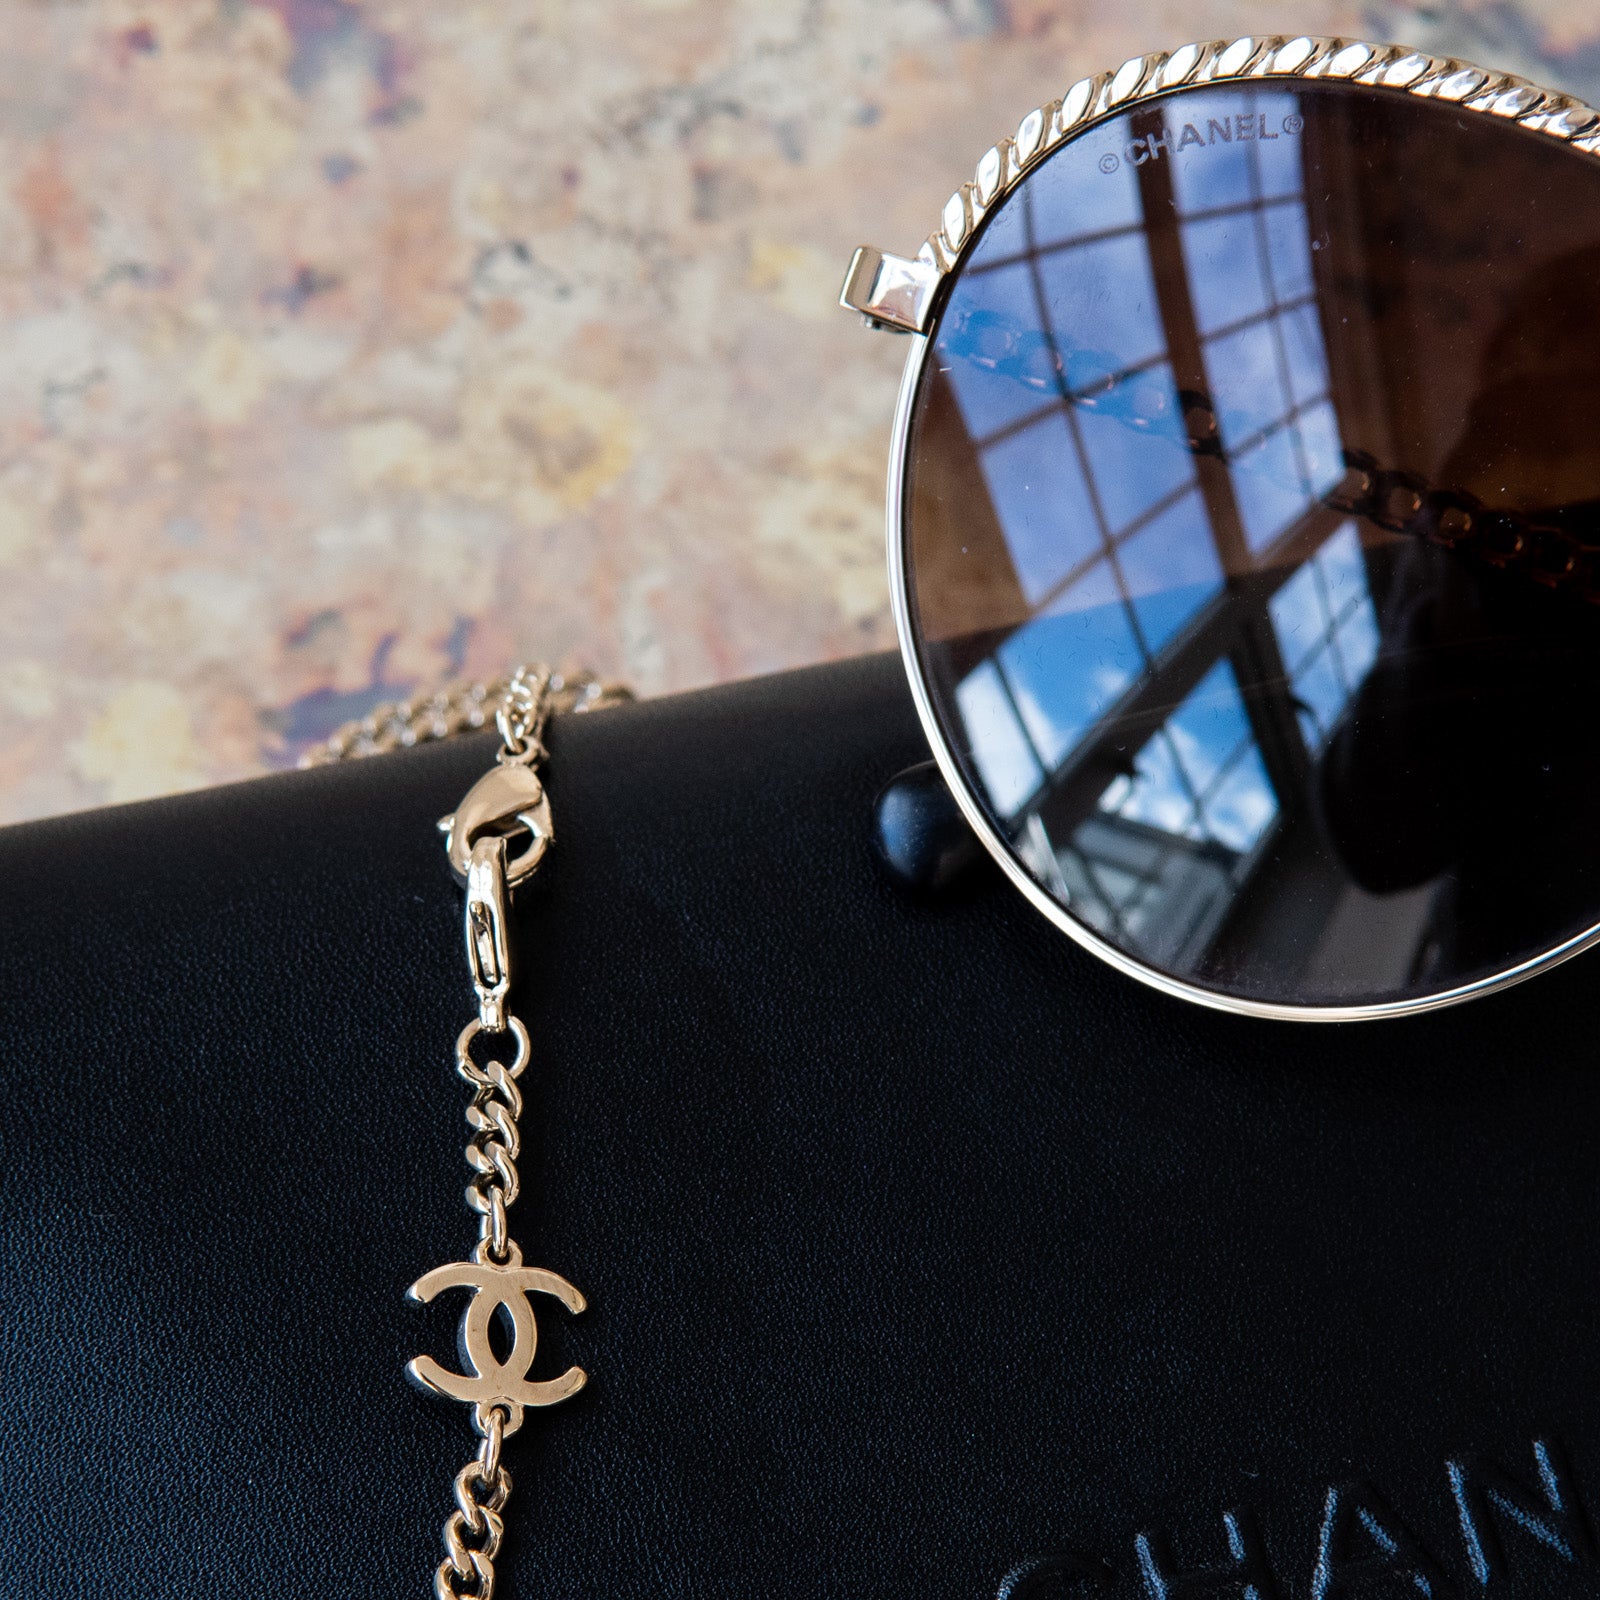 Chanel Sunglasses With Chain - Image 4 of 7